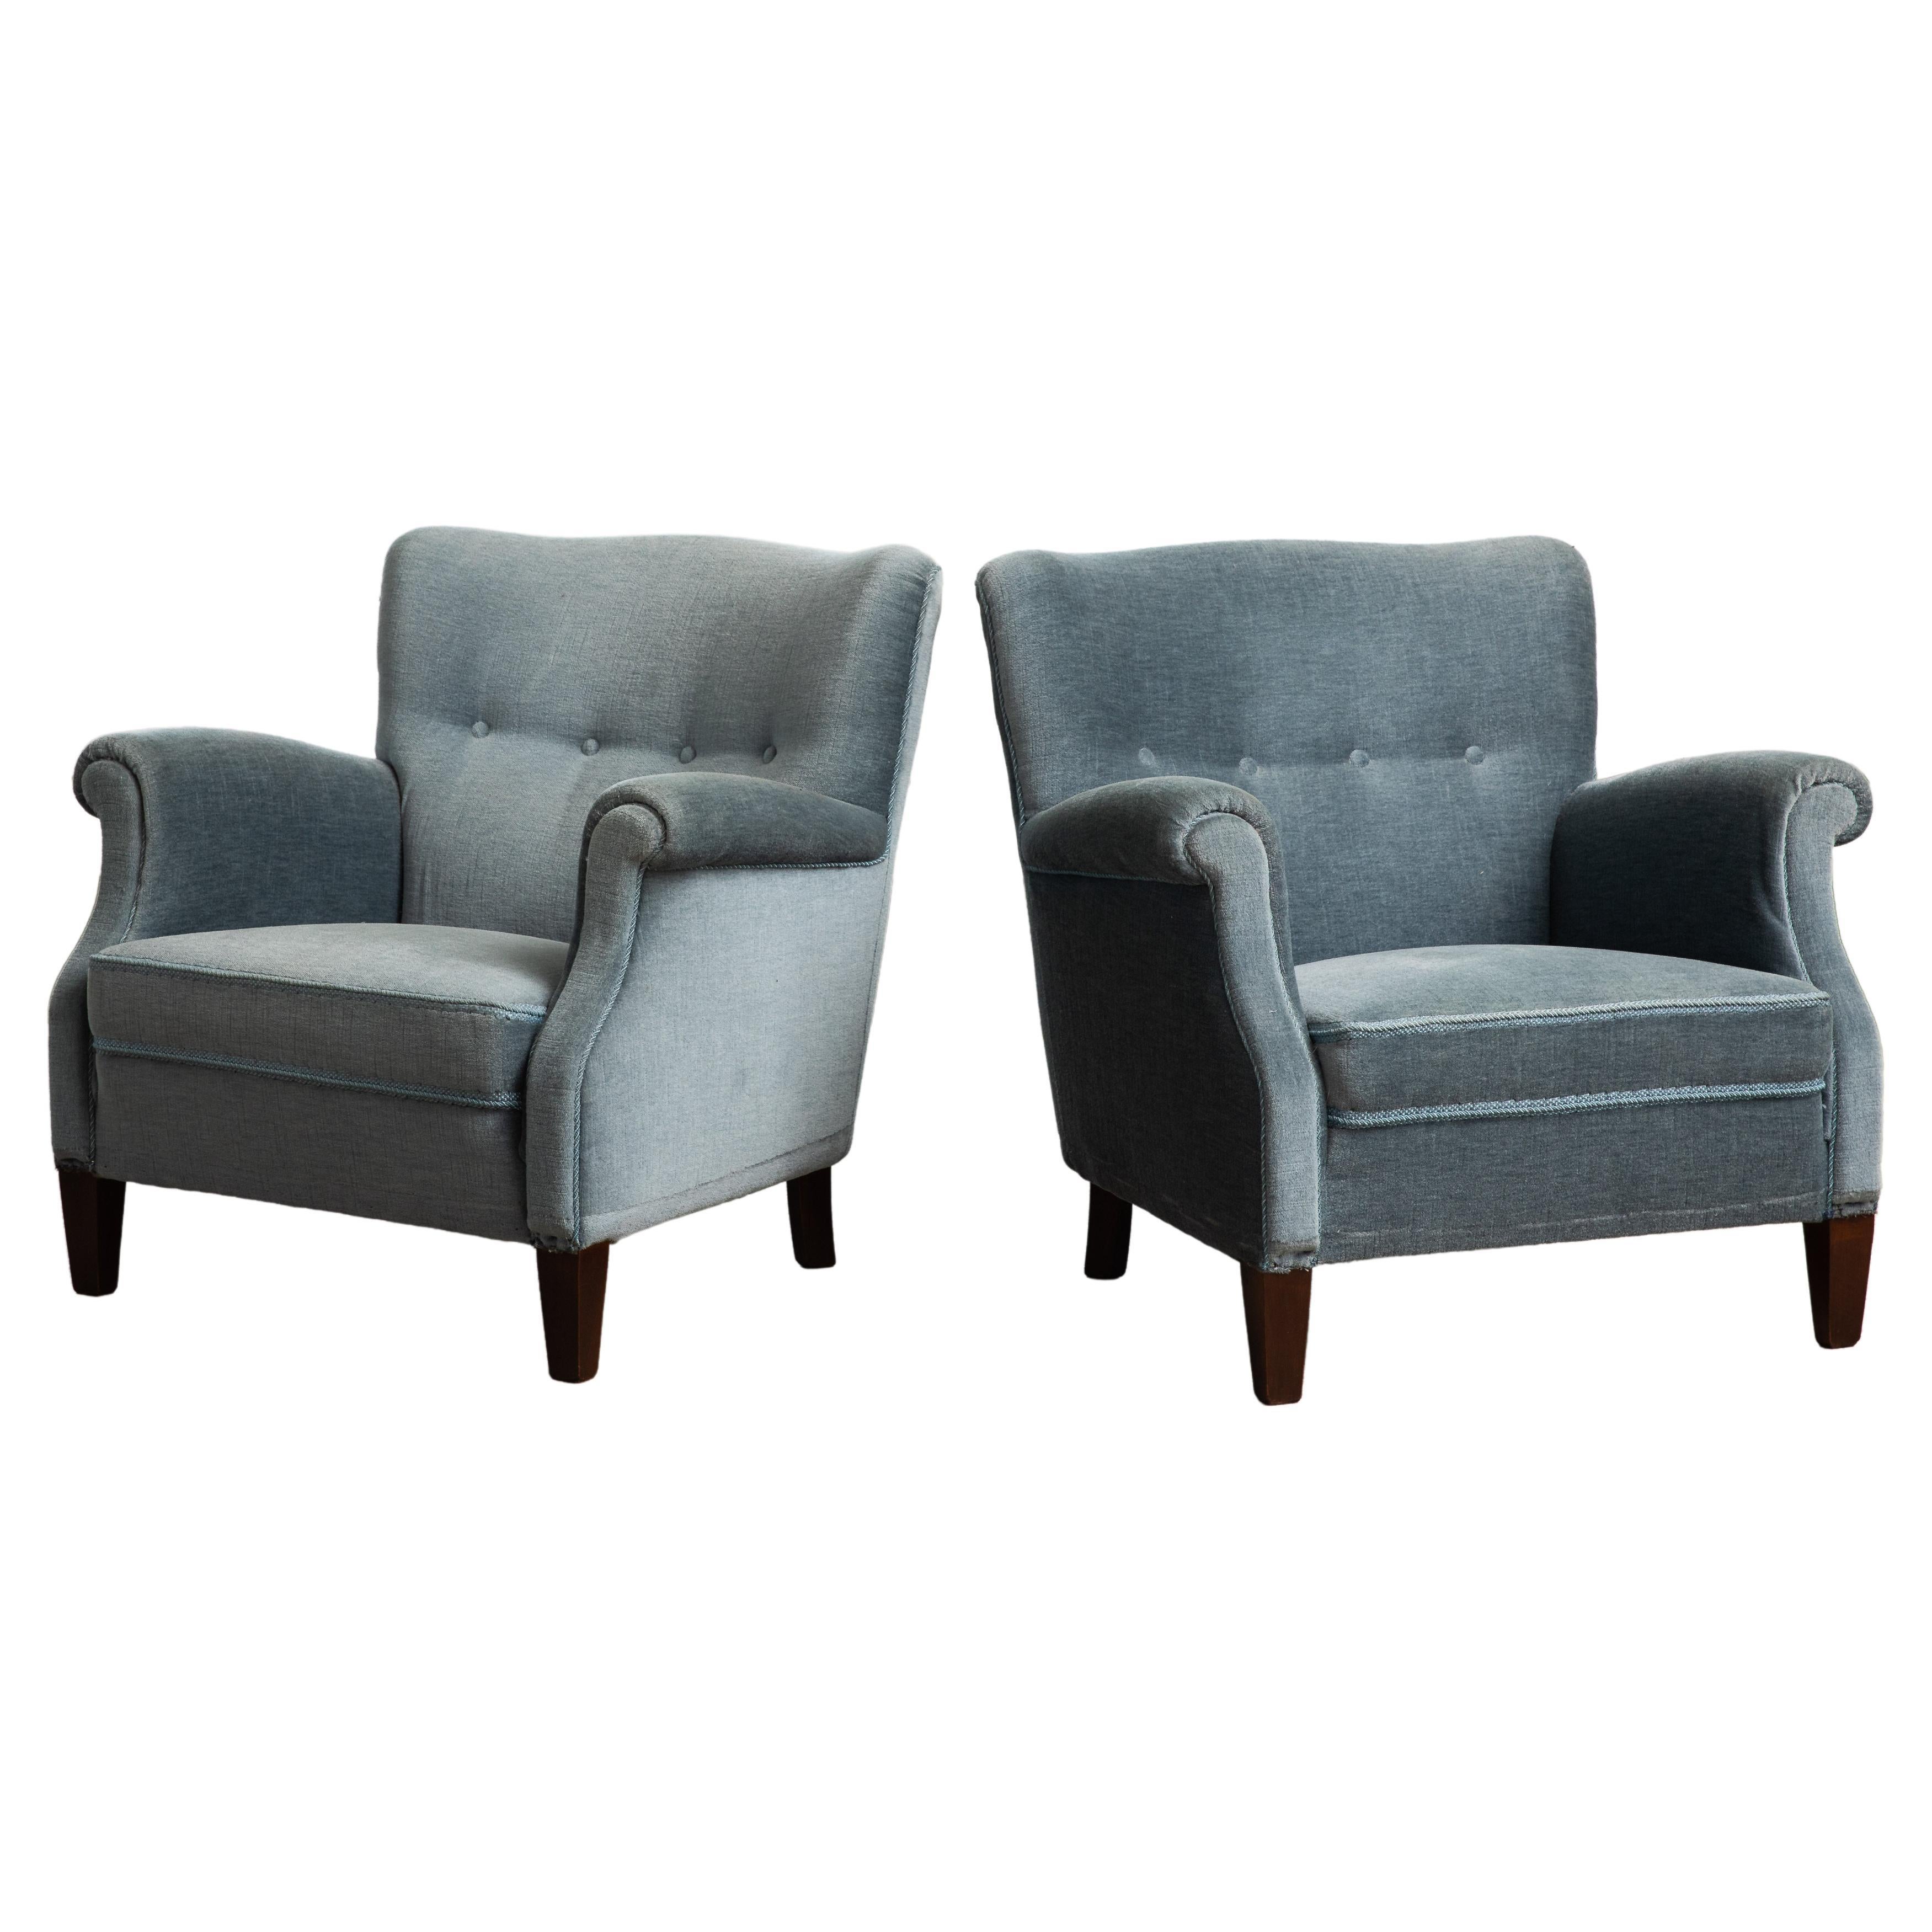 Pair of Danish 1950s Lounge Chairs in GreyBlue Mohair Attributed to Fritz Hansen